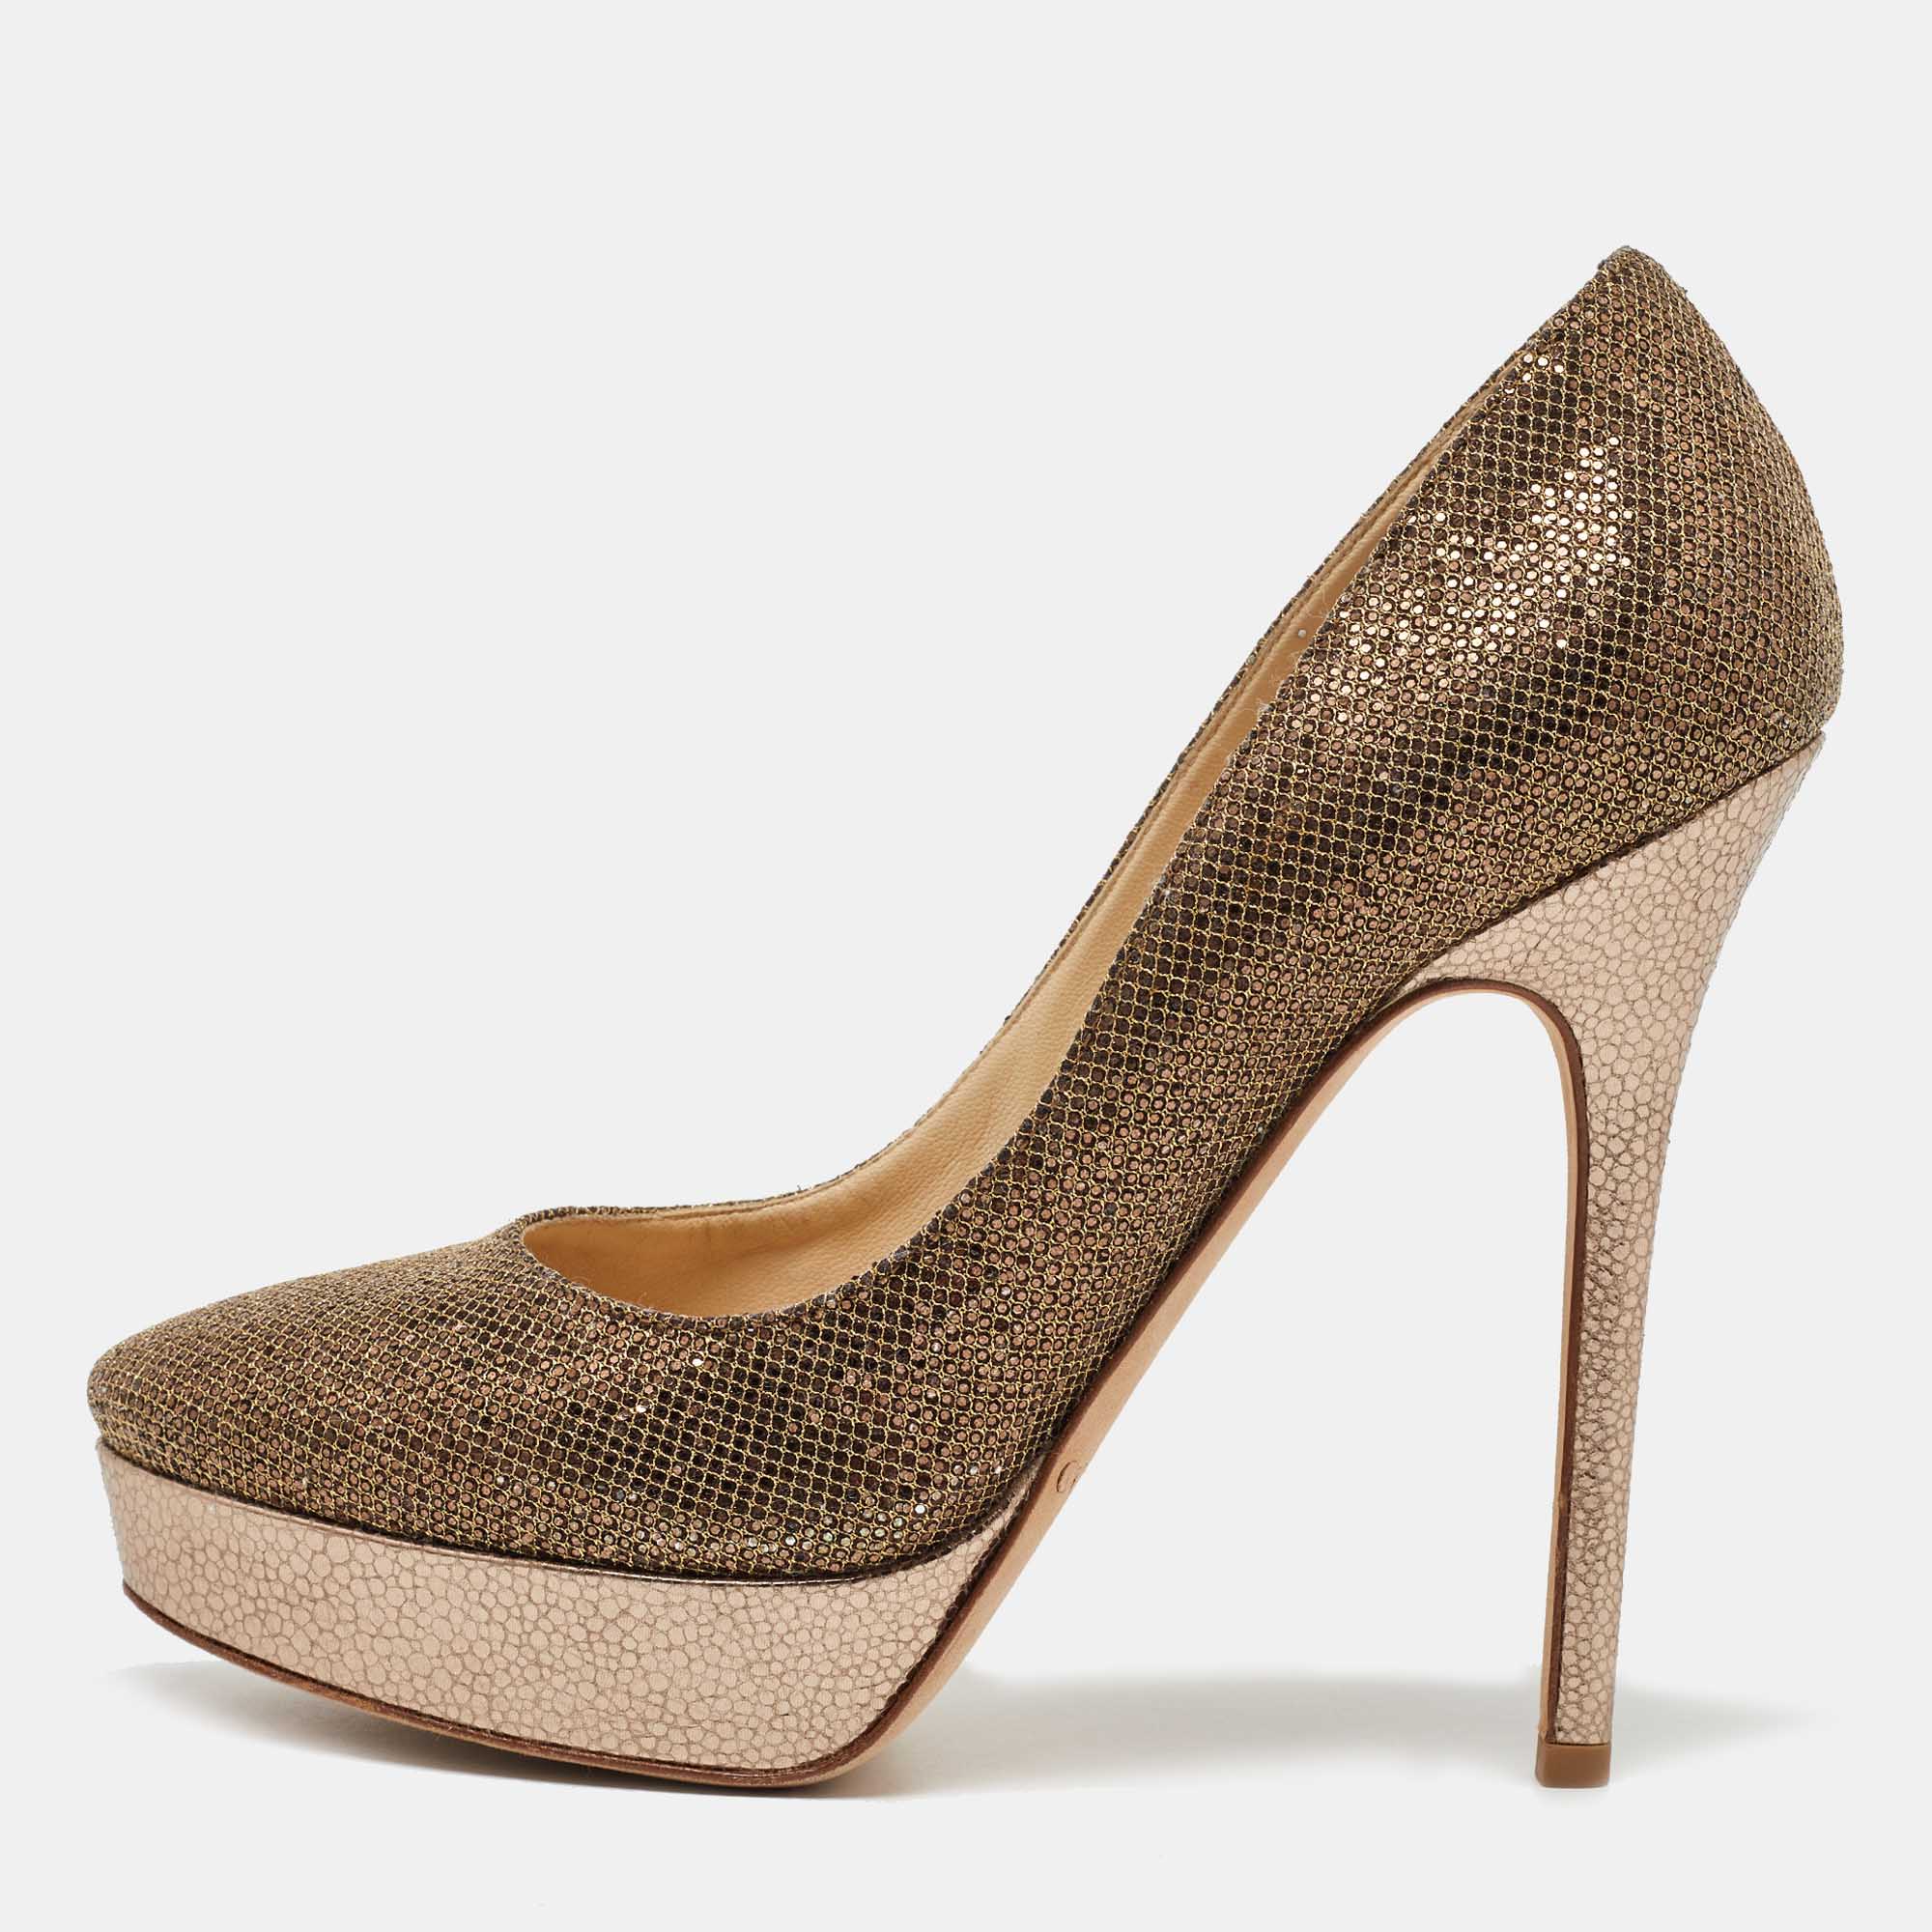 Jimmy choo gold glitter and leather cosmic platform pumps size 37.5